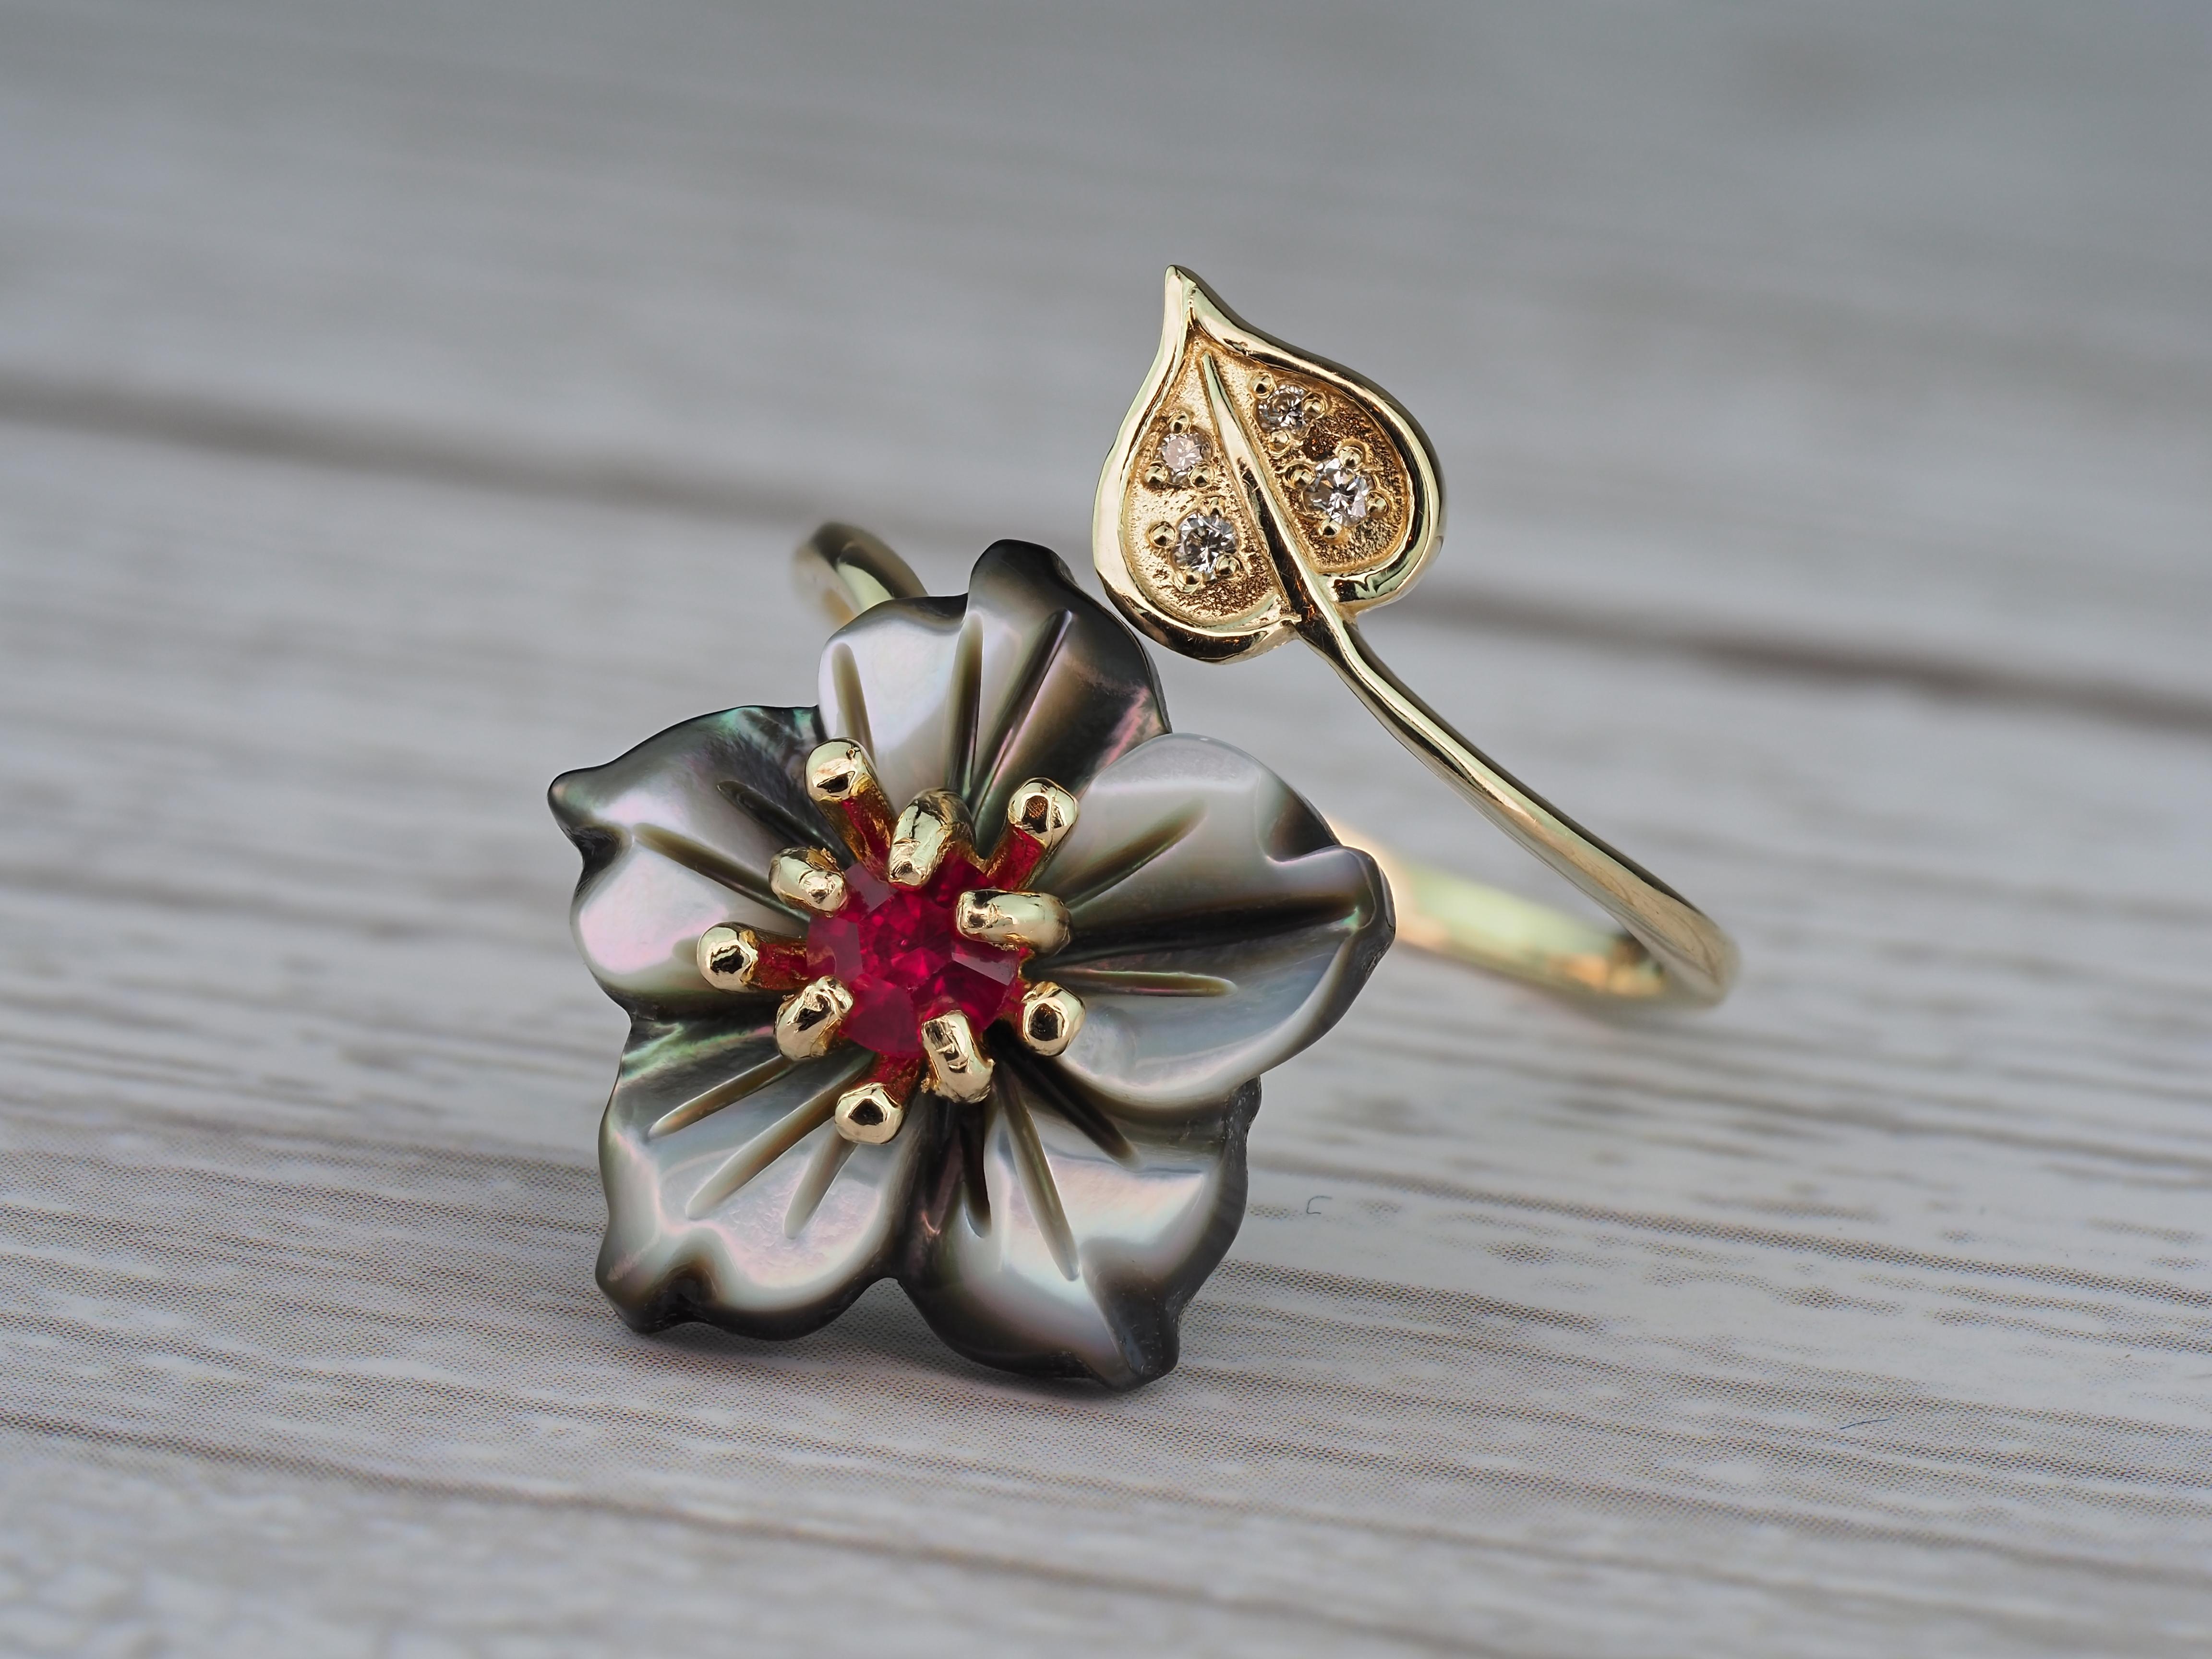 Carved Flower 14k ring with gemstones.
Lab ruby ring in 14k gold. Carved mother of pearl flower ring. Flower gold ring. Ruby vintage ring. Nature inspired ring with mother of pearl flower. Shell flower ring.

Metal: 14k solid gold
Weight: 2.2 g